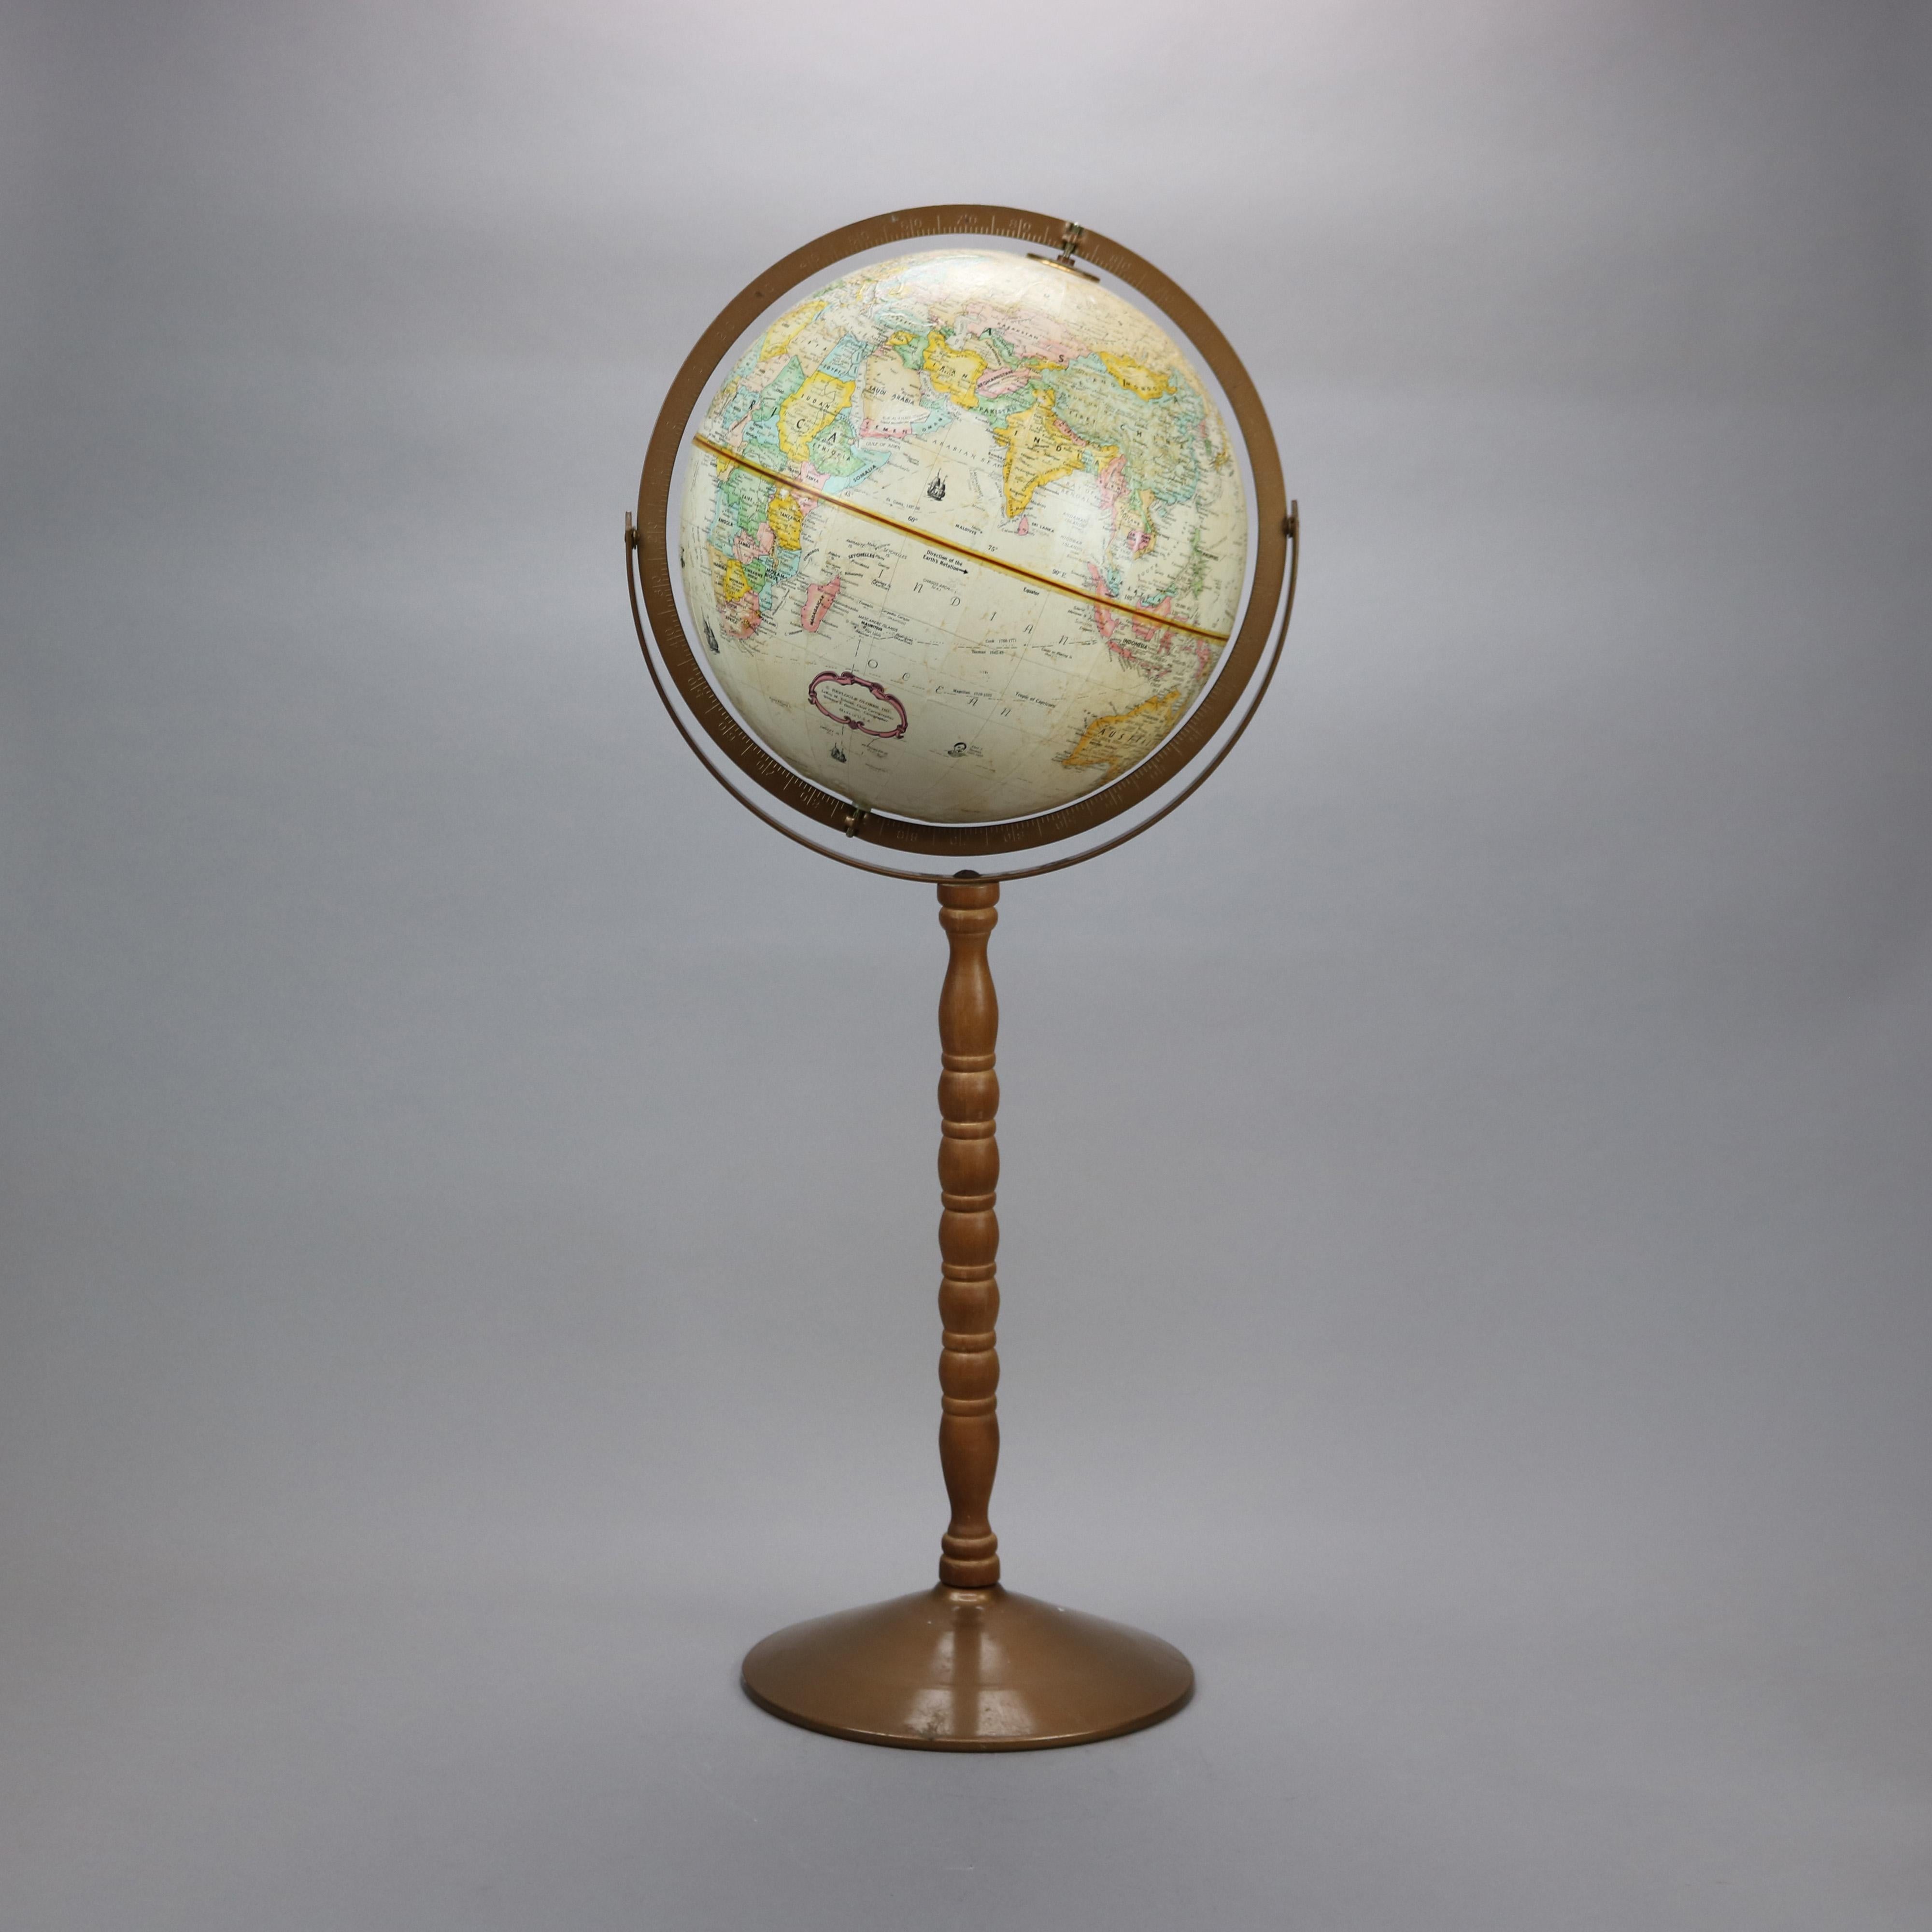 A globemaster floor globe by Replogle offers globe on brass and bronzed metal base having swivel carriage on column with circular foot, 20th century

Measures: 32 1/4' x 13 1/2